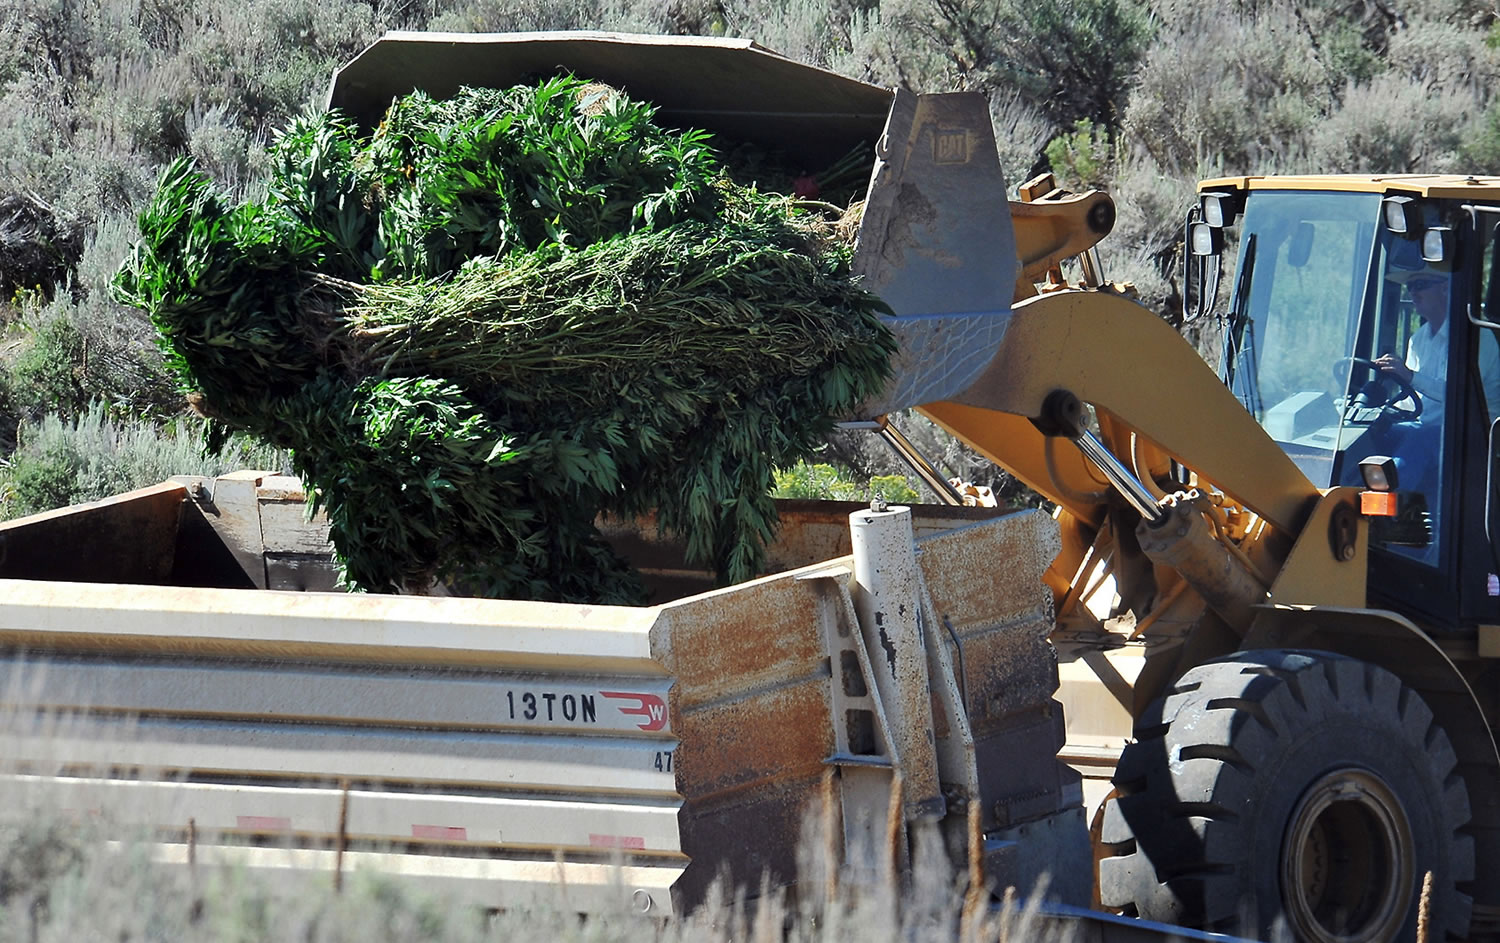 A crew disposes of marijuana plants Wednesday in Caribou County, west of Grace, Idaho, where a sophisticated growing operation in southeastern Idaho contained an estimated 40,000 plants worth an estimated street value of $80.5 million.